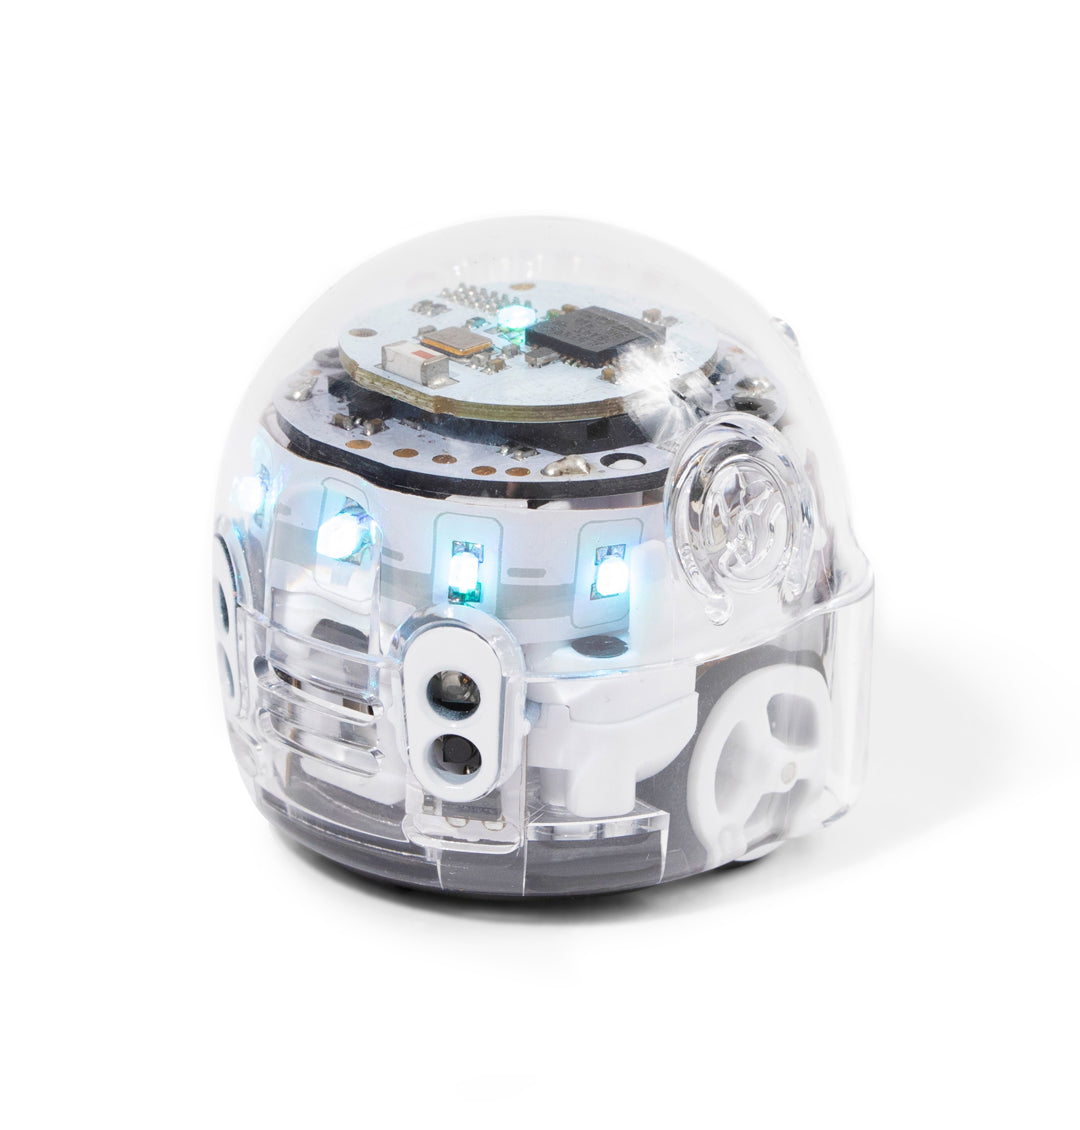 https://shop.ozobot.com/cdn/shop/products/Ozobot-Evo-WHT_WebRes-1080x1130_c01e1386-47ad-4708-8c8c-62784bea2d9d_1200x1200.jpg?v=1699569963